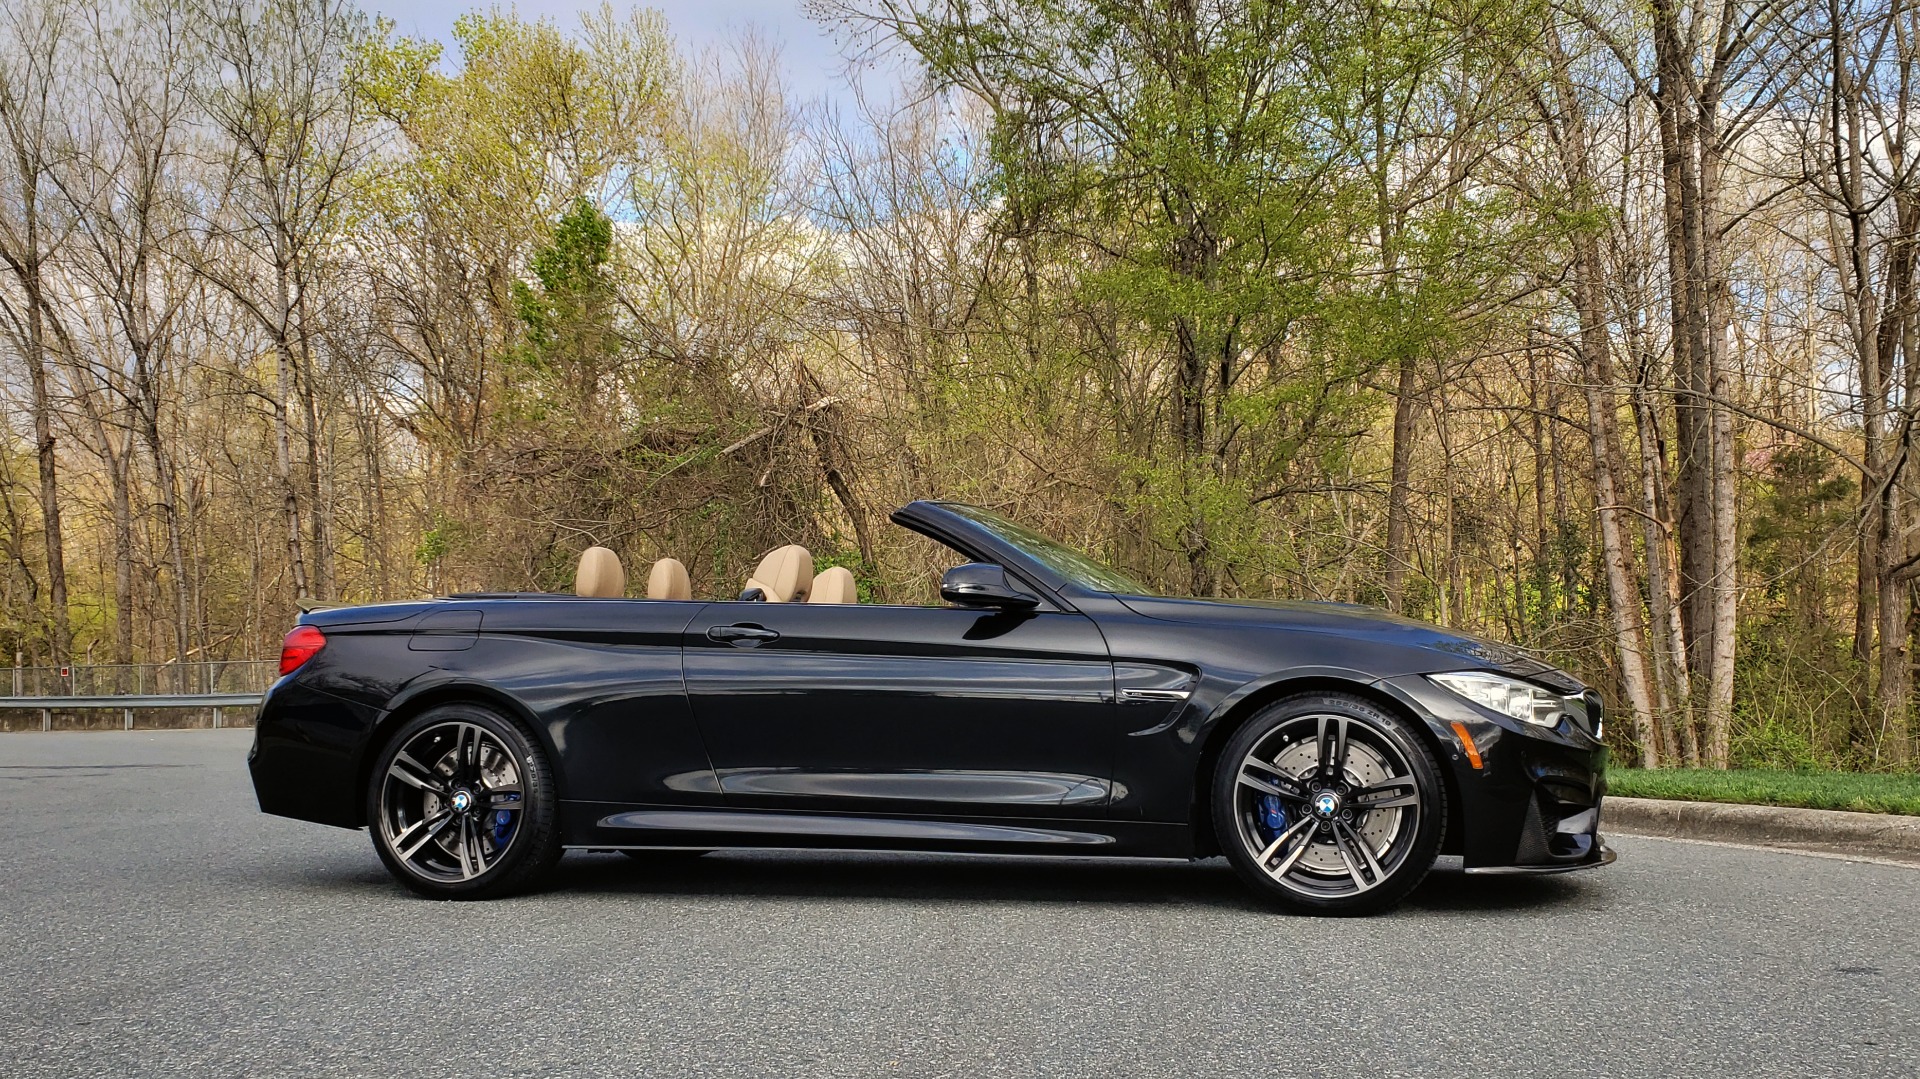 Used 2016 BMW M4 CONVERTIBLE / EXEC PKG / DRVR ASST / M SUSPENSION for sale Sold at Formula Imports in Charlotte NC 28227 8